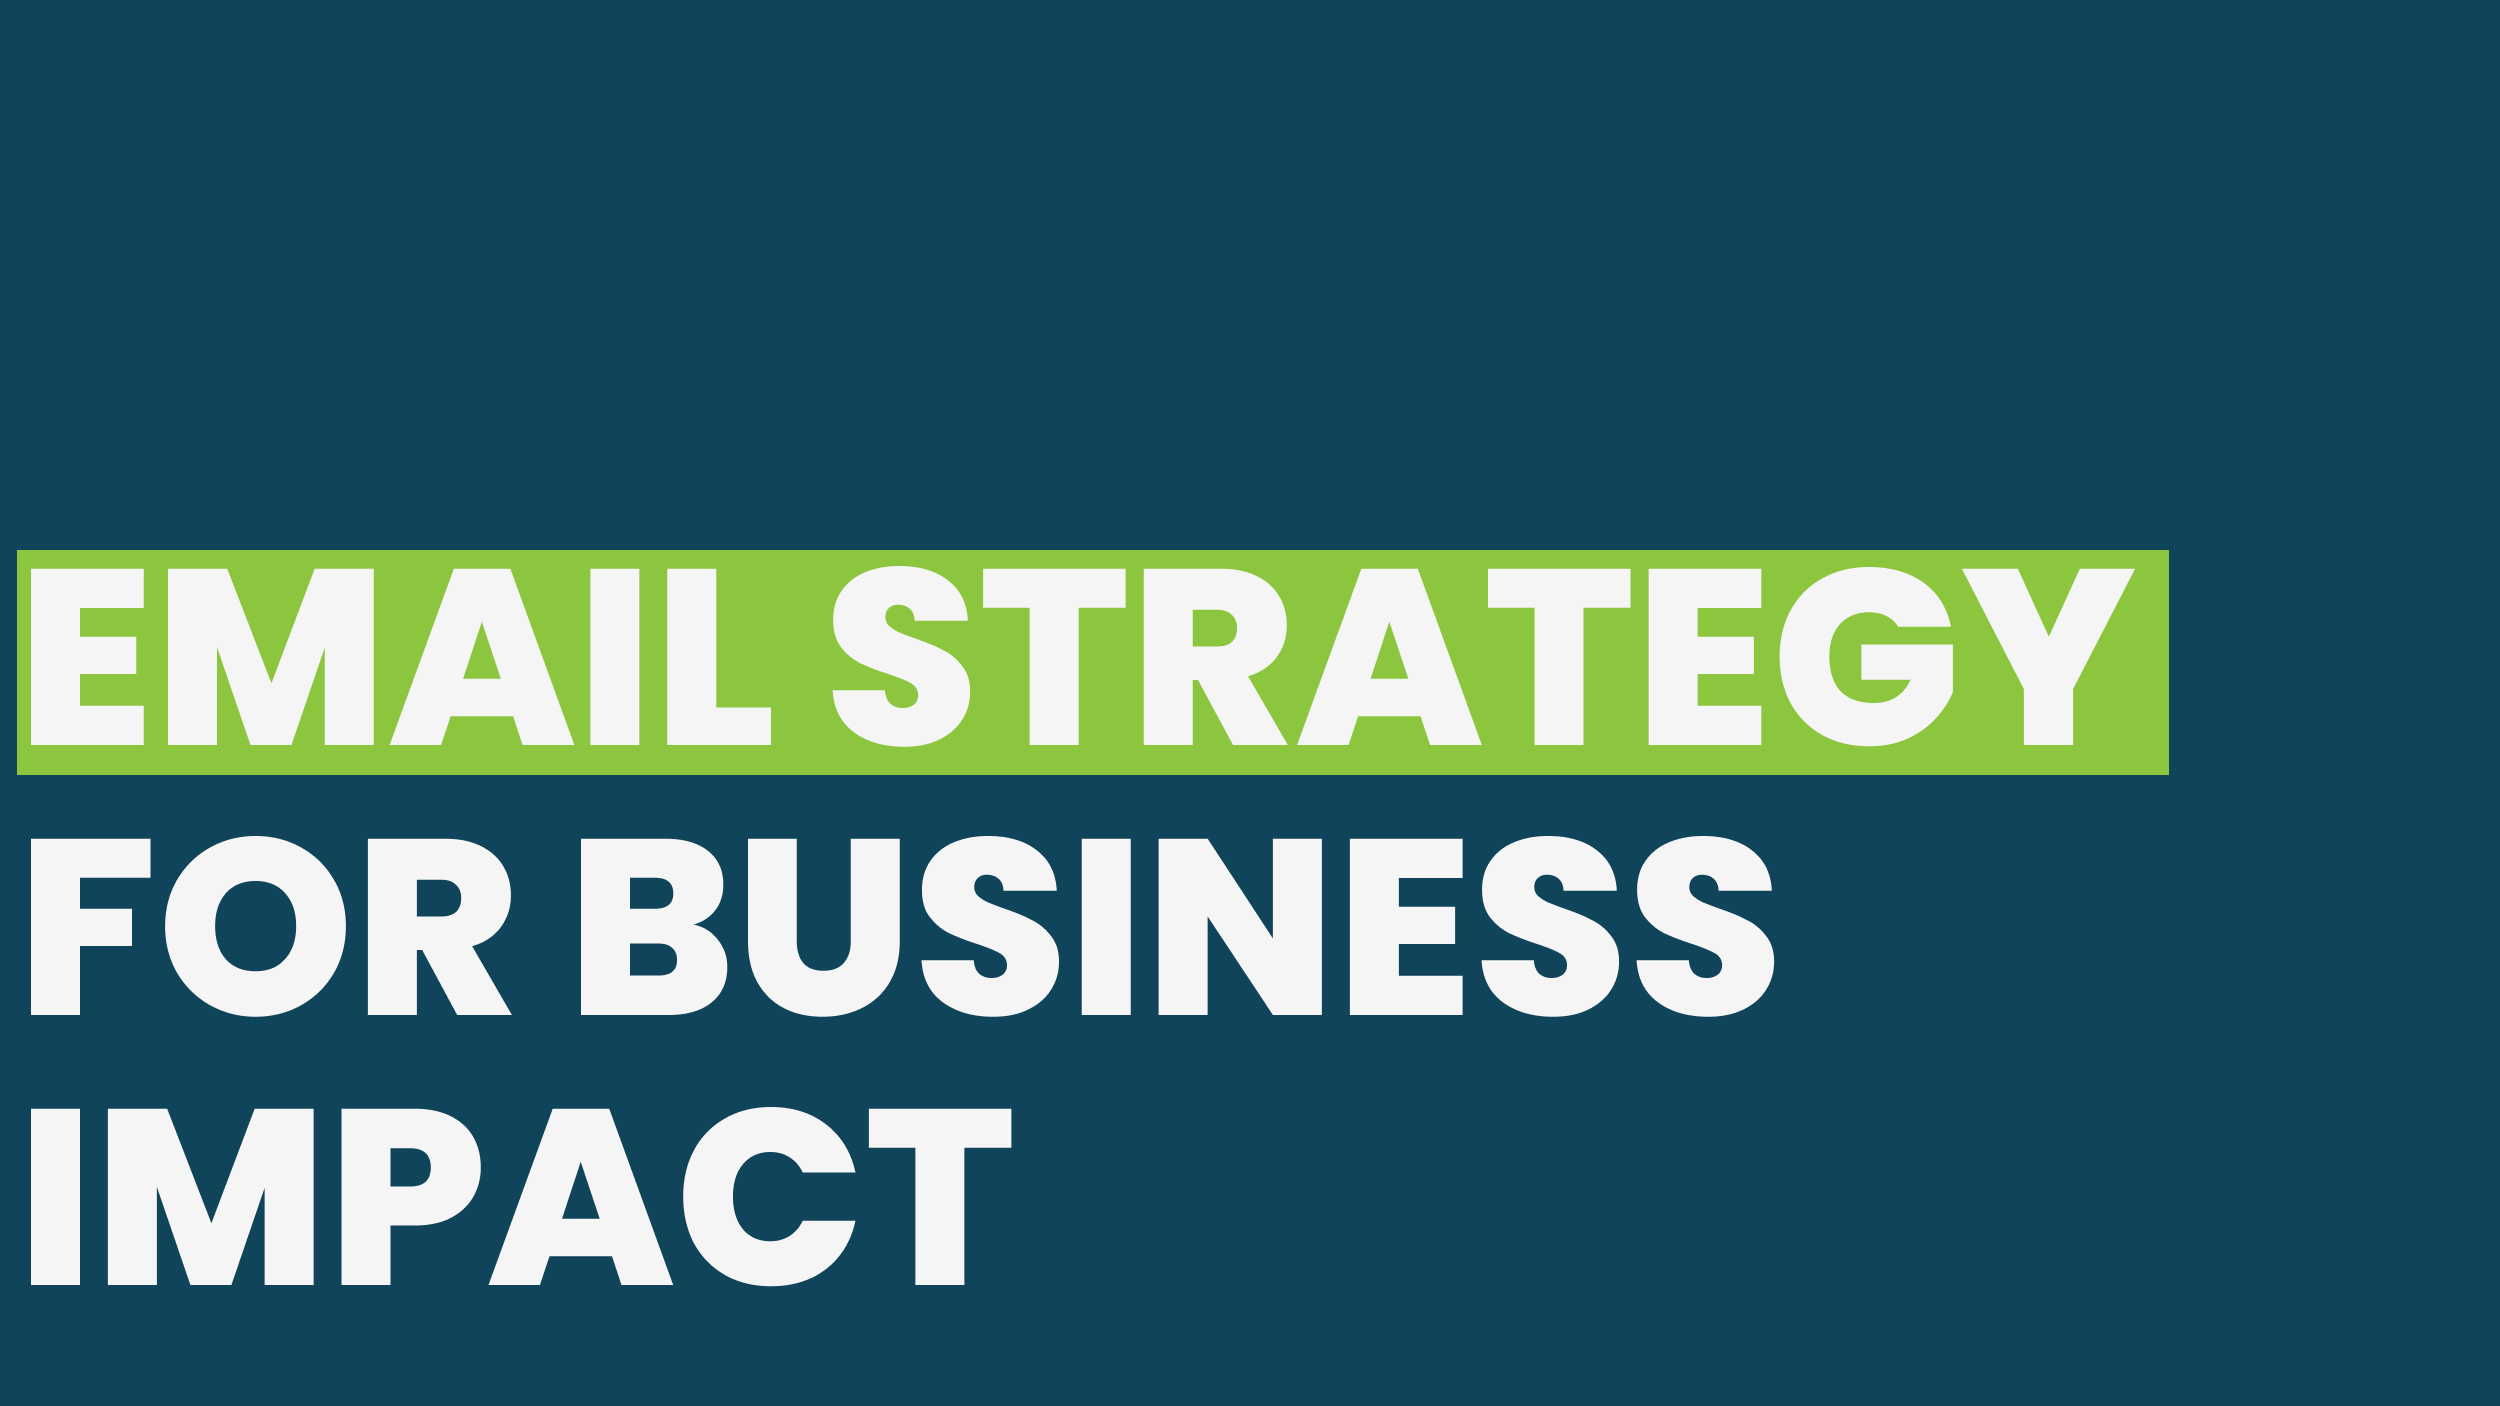 EMAIL STRATEGY FOR BUSINESS IMPACT